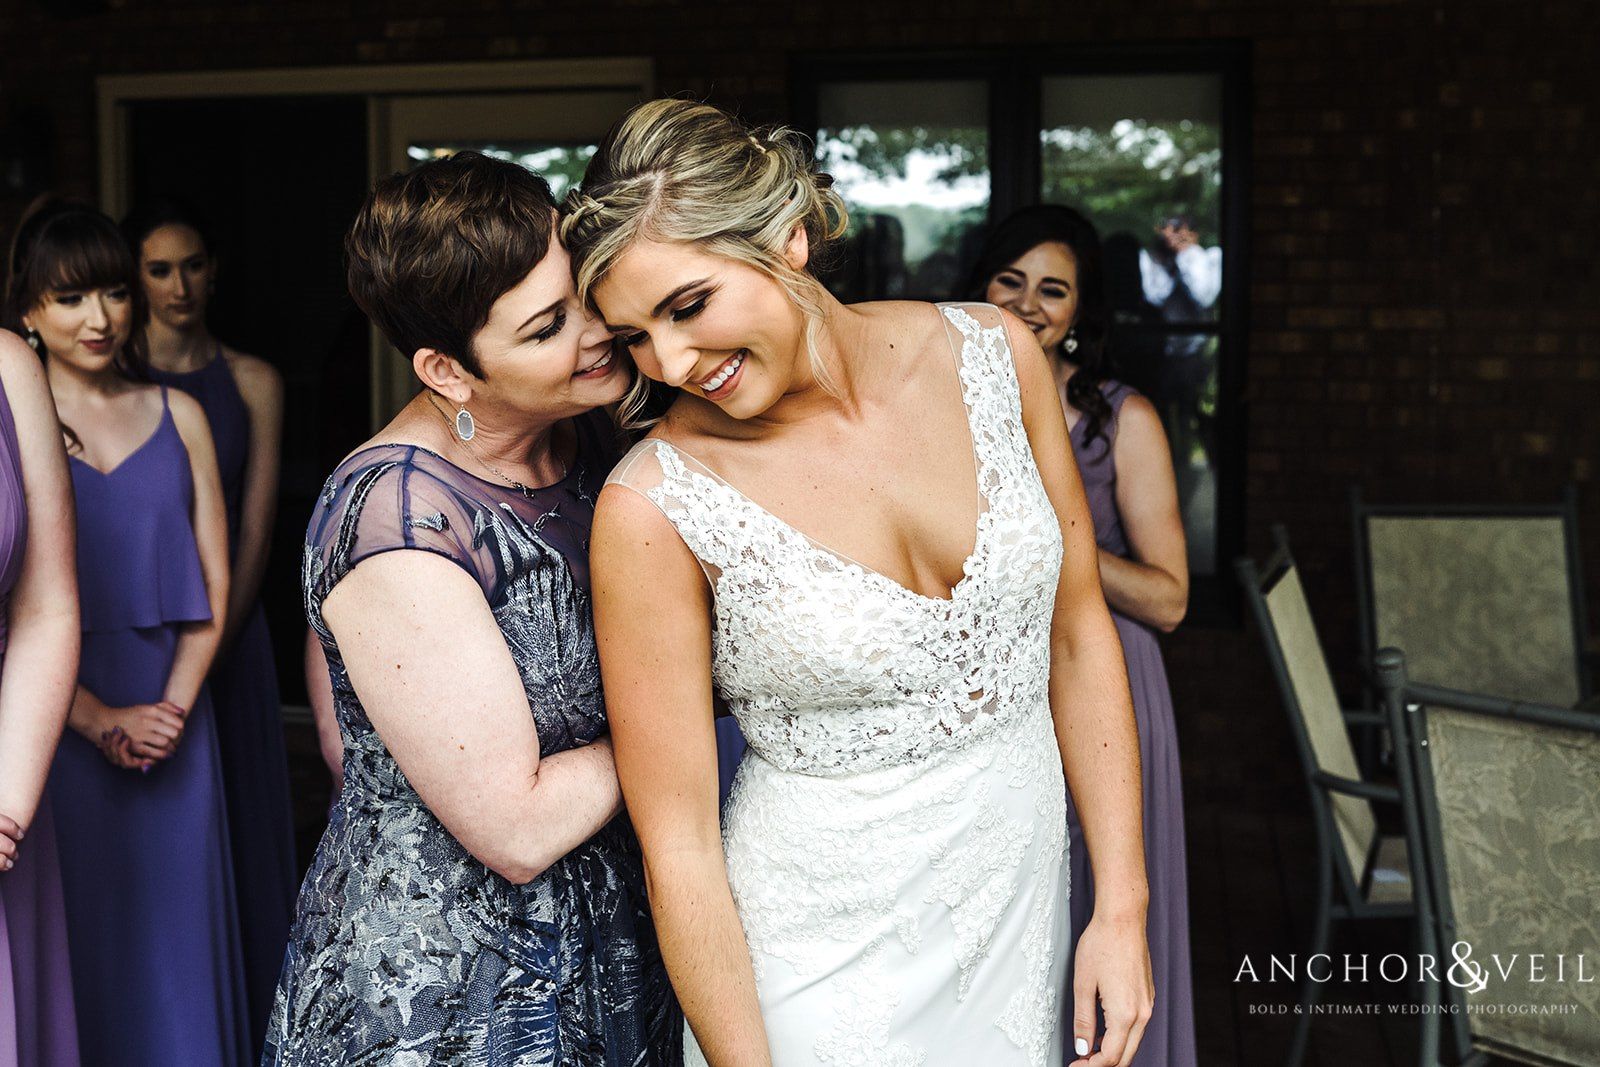 A touching moment between the Bride and her mother at The Farm at Brusharbor Wedding